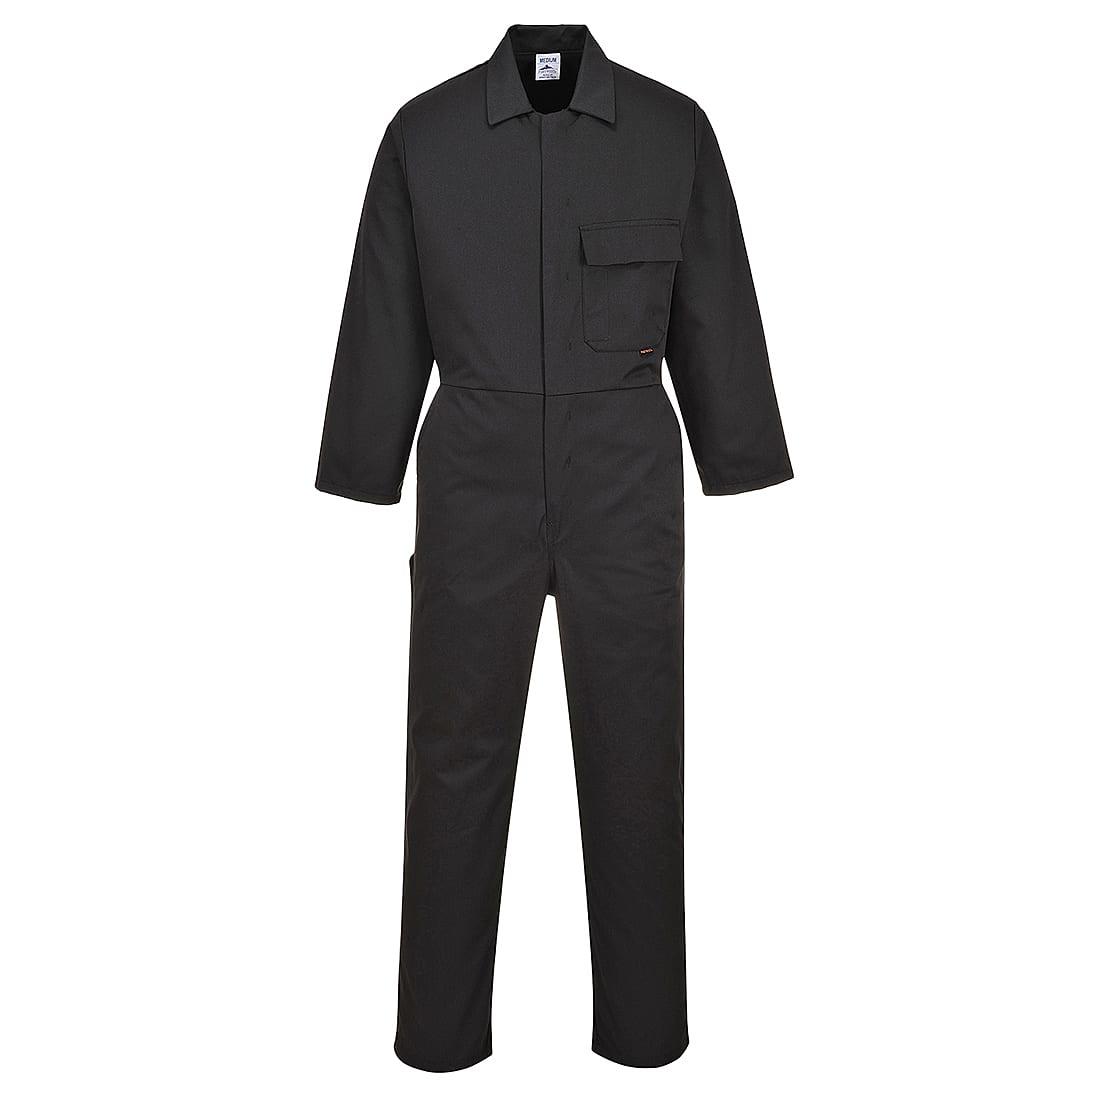 Portwest C802 Standard Coverall in Black (Product Code: C802)